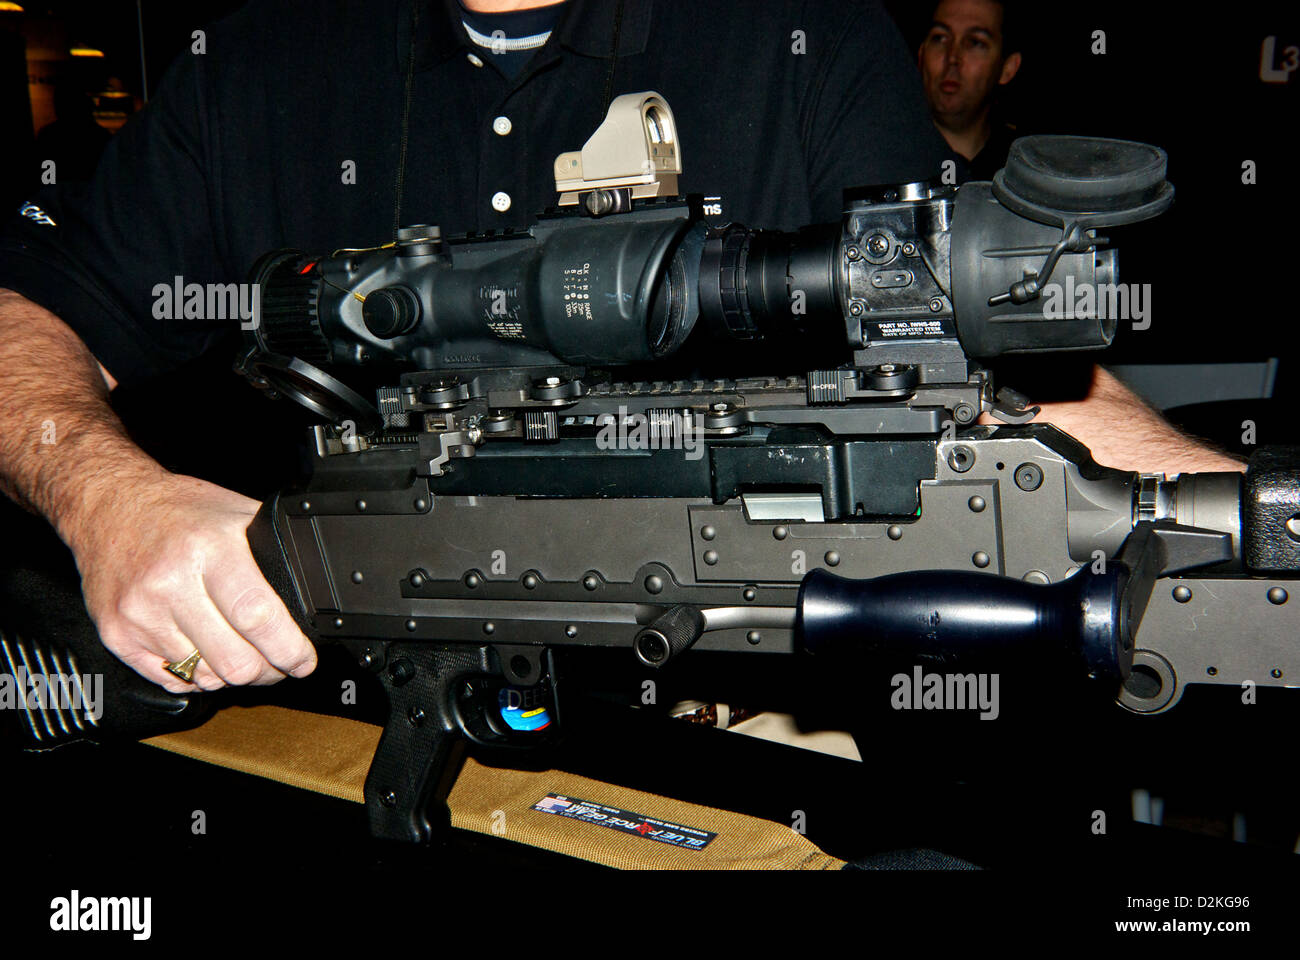 Military assault rifle with Trijicon ACOG night vision telescopic sight Stock Photo